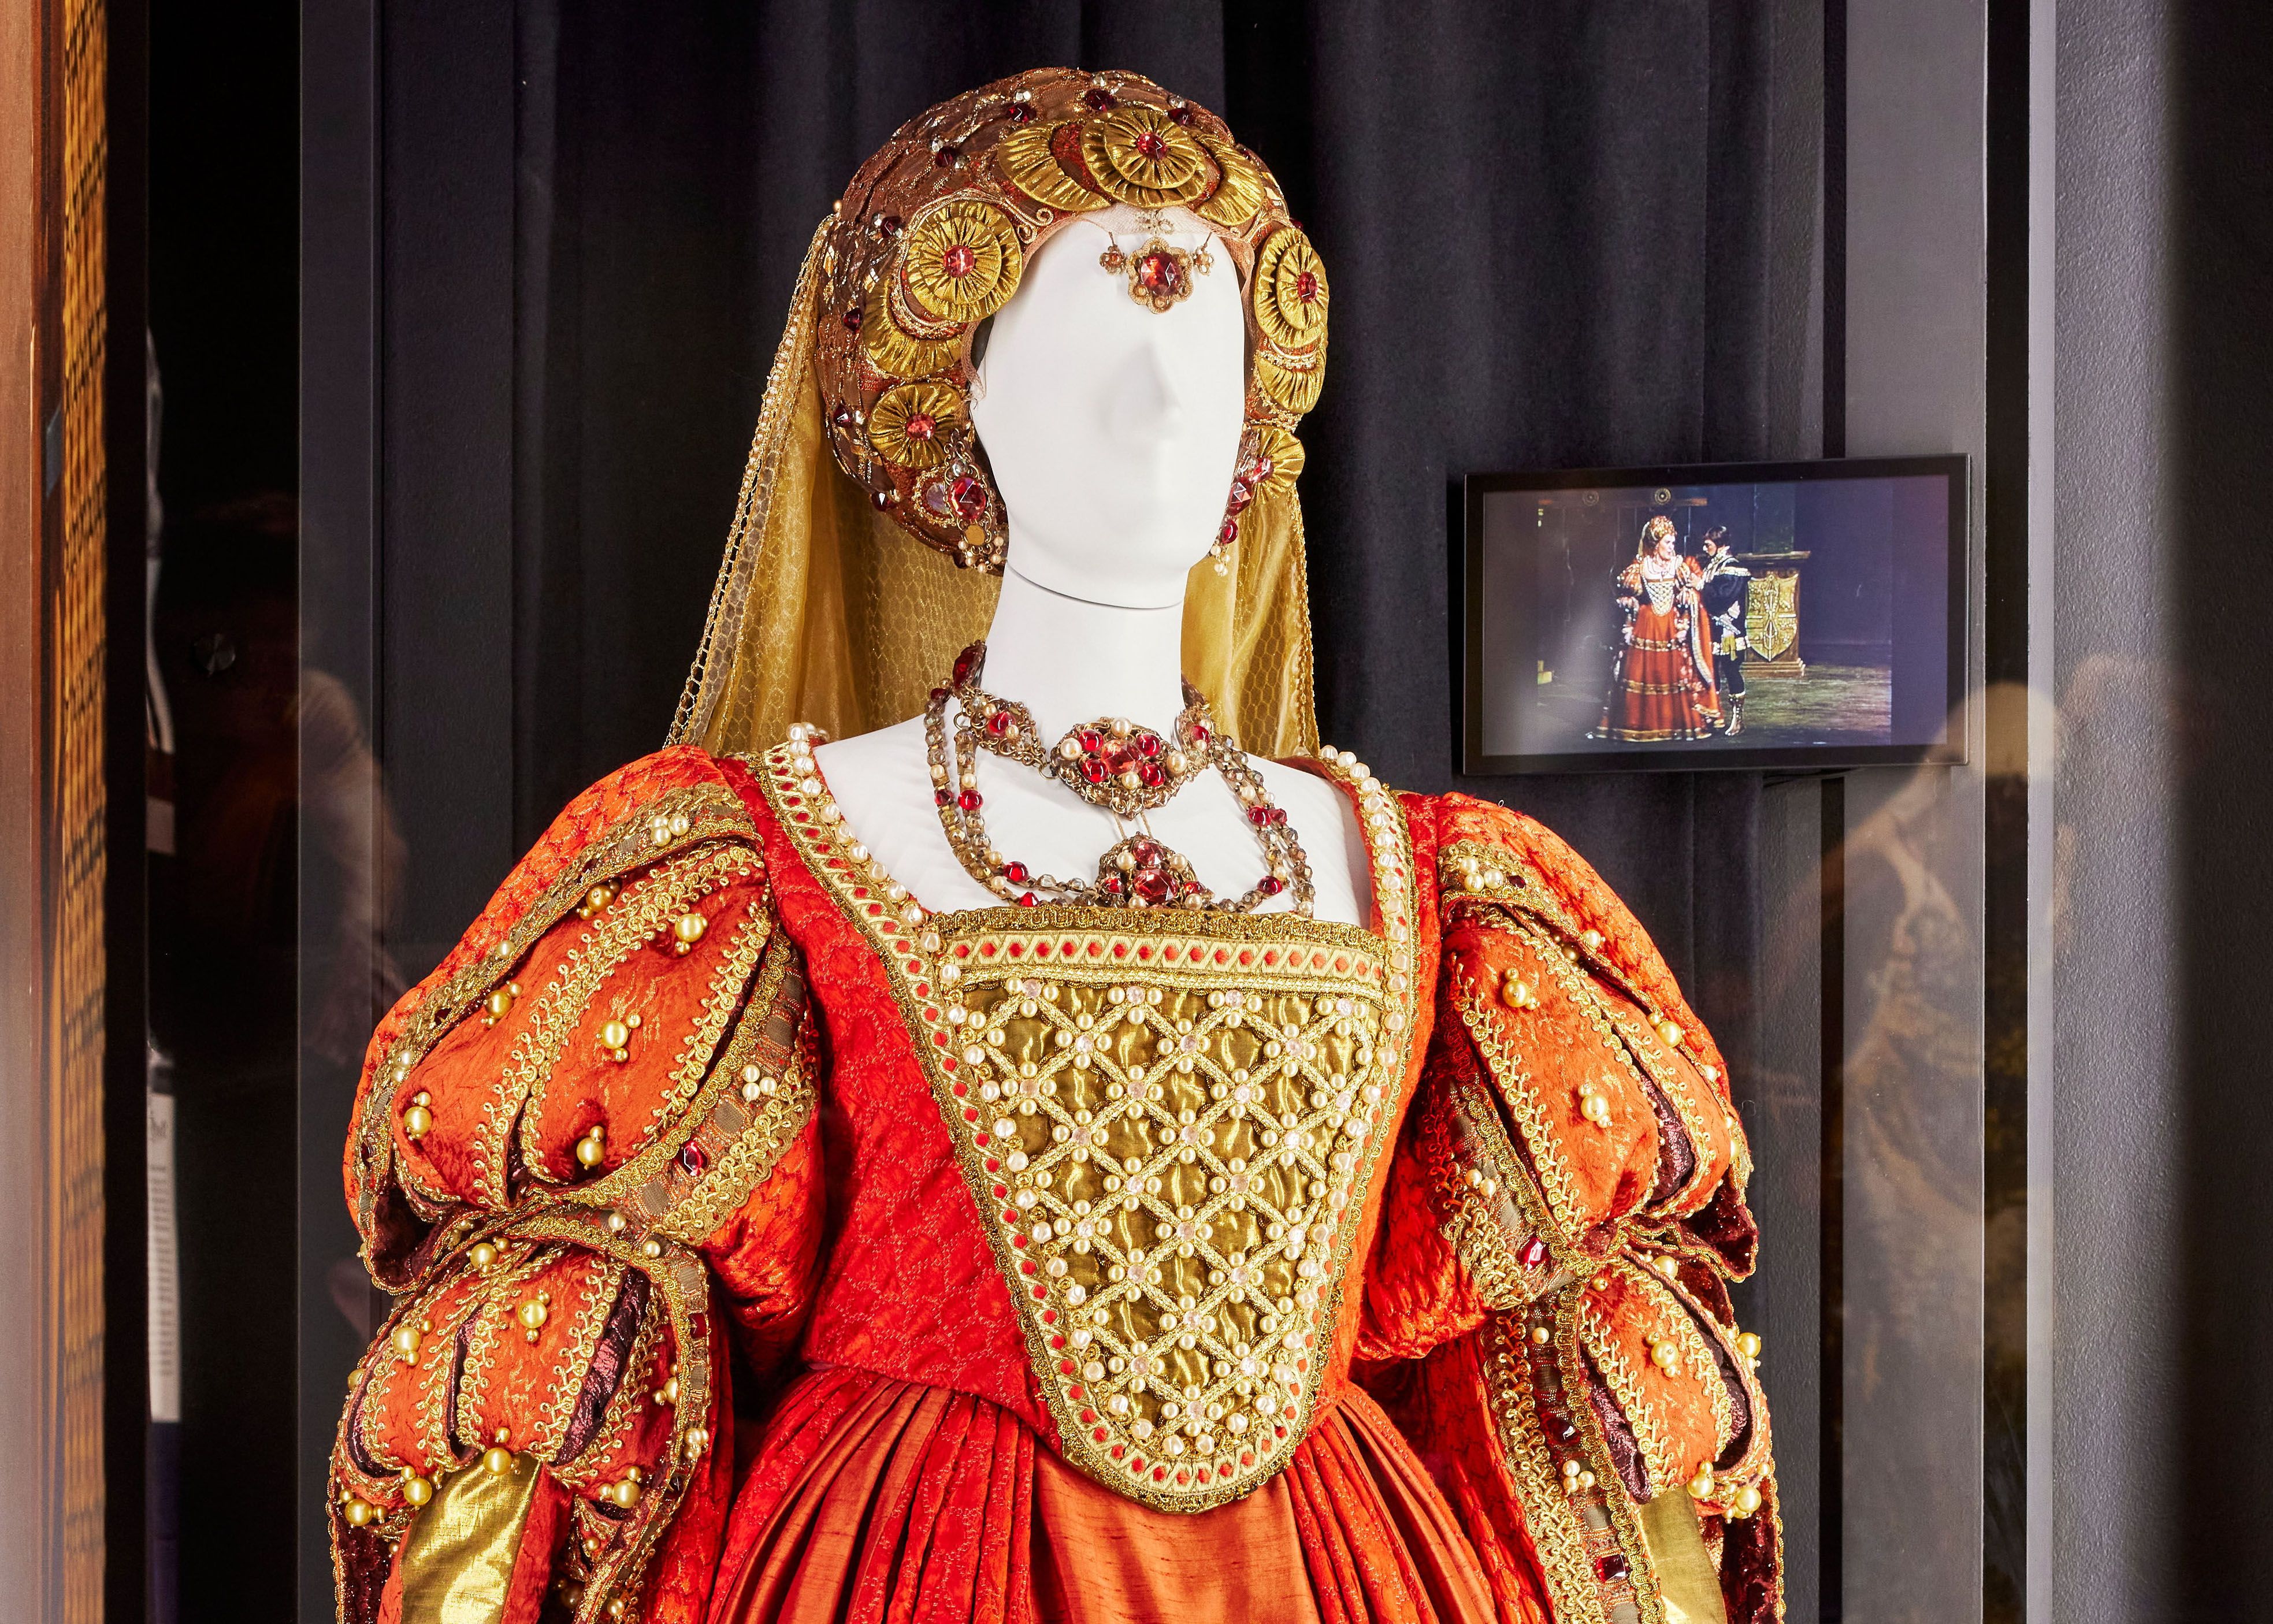 A mannequin dressed in an elaborate Renaissance-style stage costume stands in a large Perspex-fronted display case . On the rear wall a small screen is showing a scene from the opera Lucrezia Borgia where Dame Joan Sutherland is wearing the same costume. 